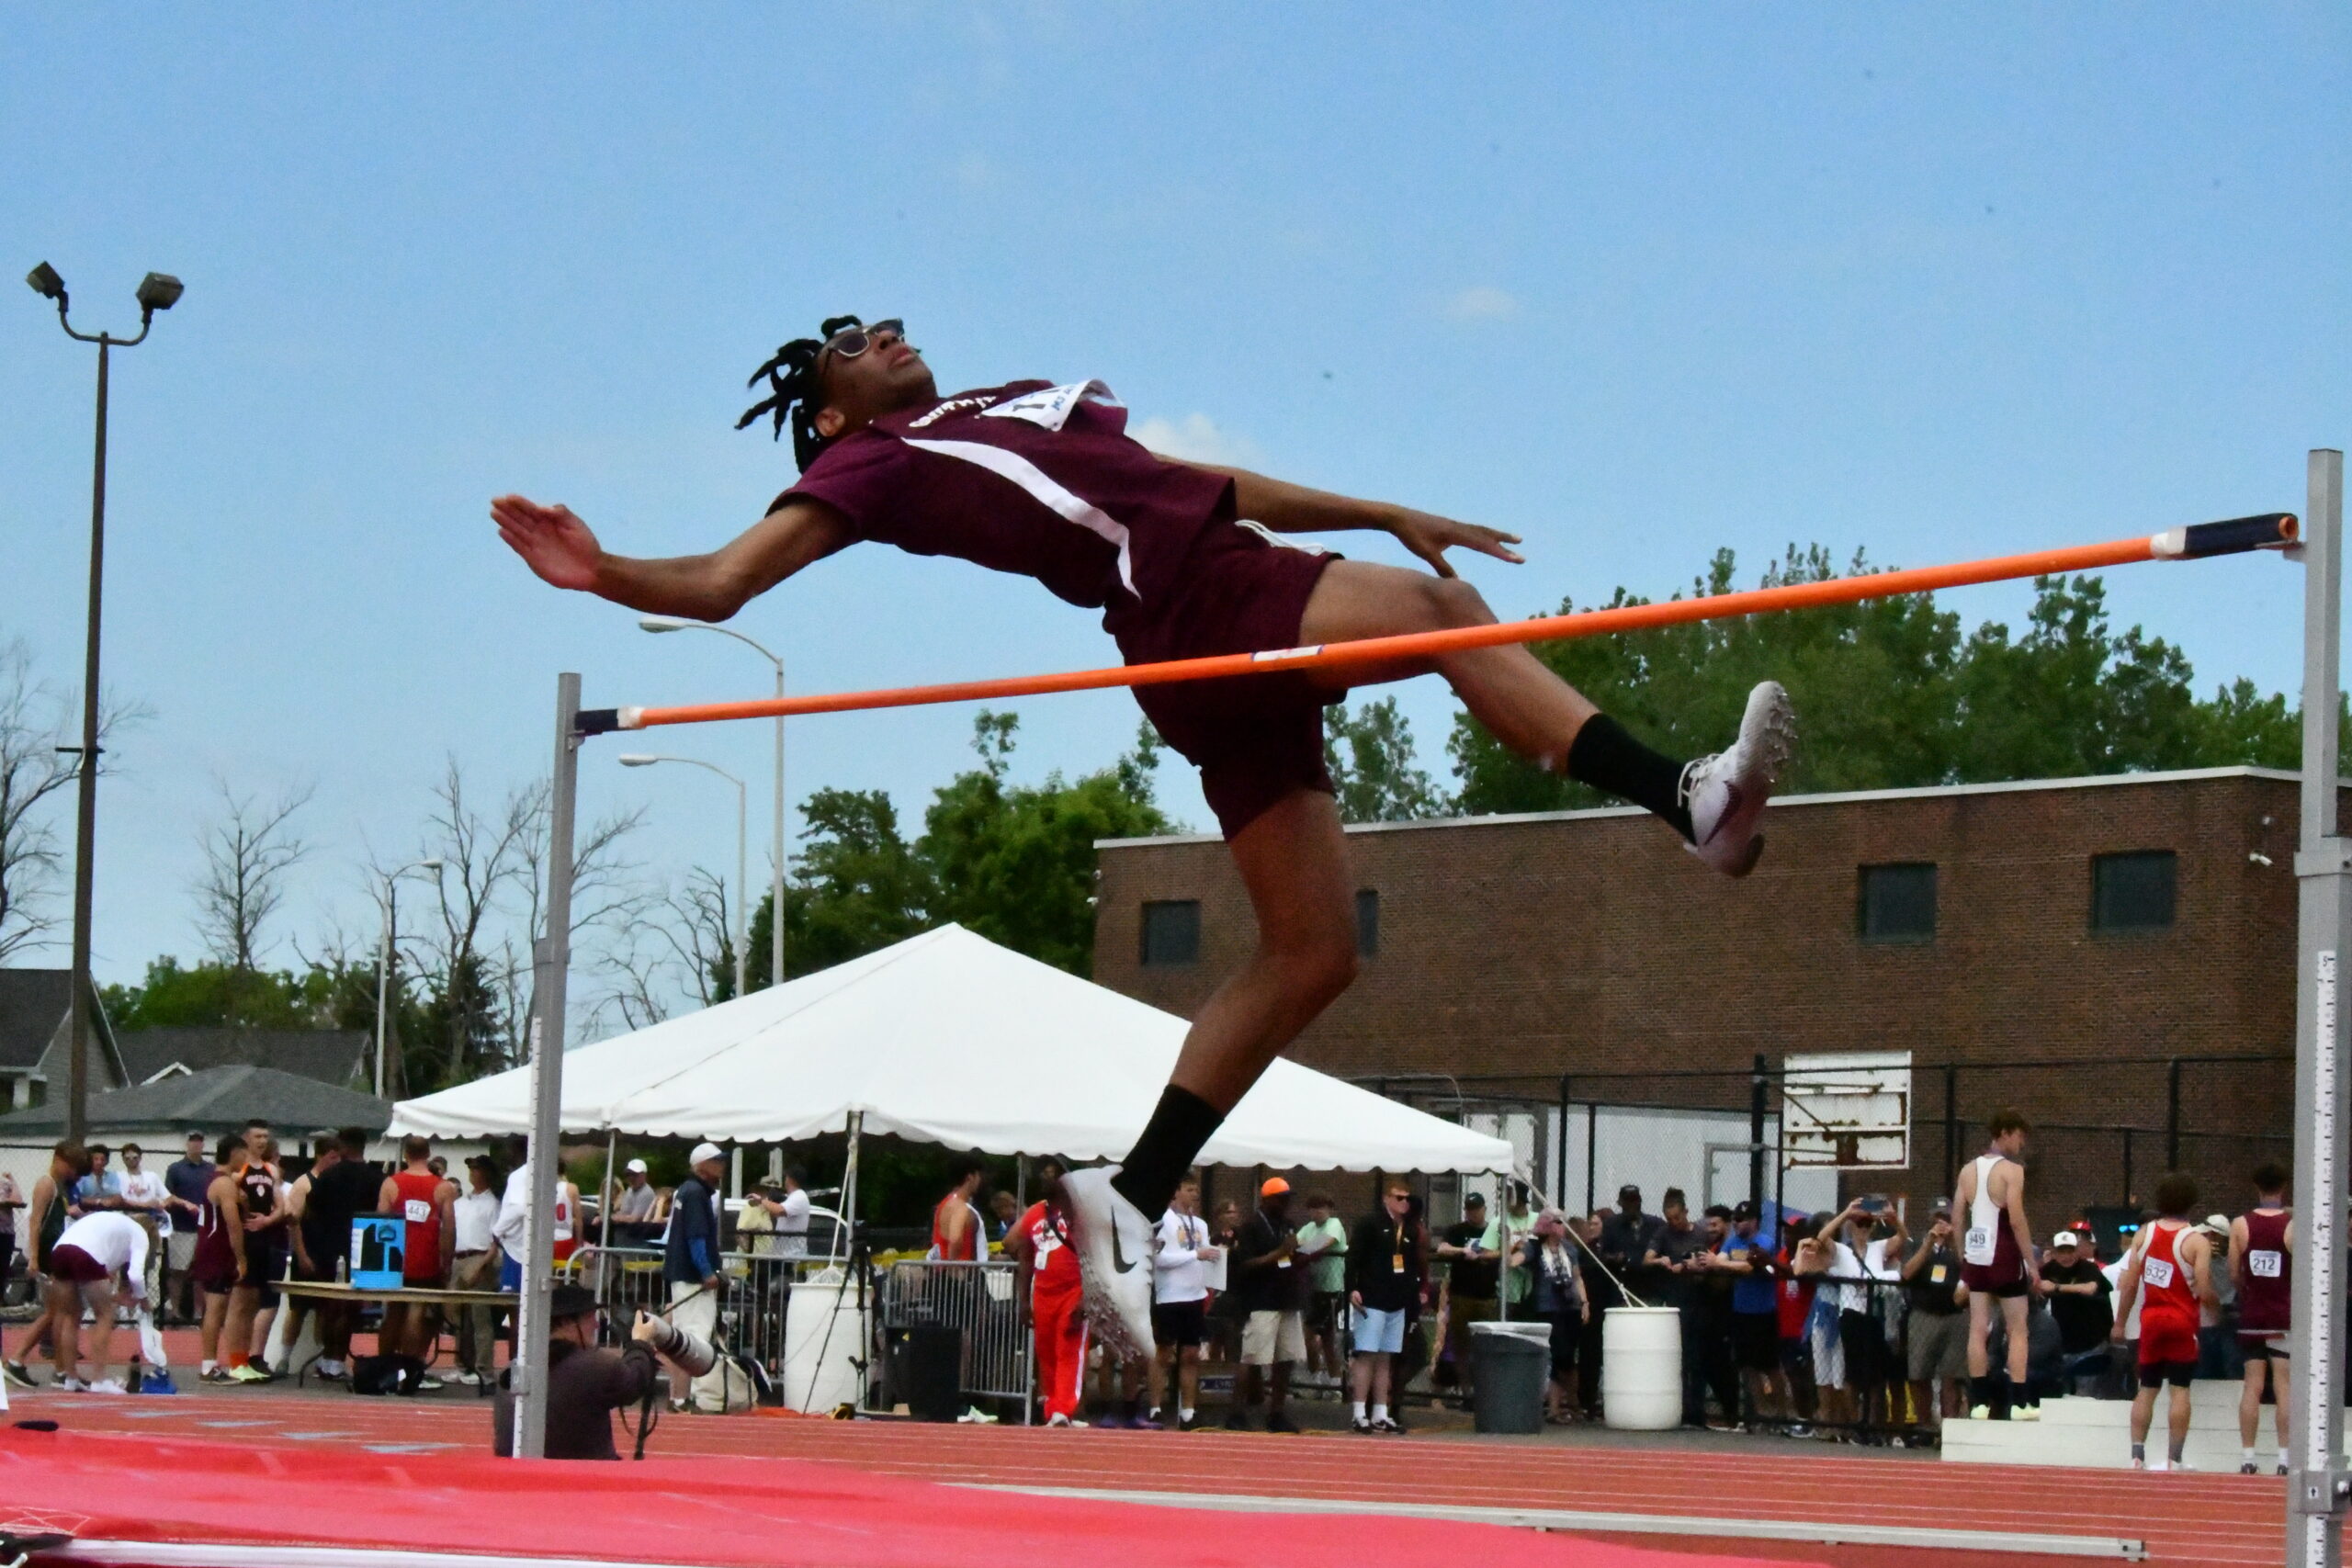 Southampton senior Ryan Smith equaled his personal-best mark, clearing six feet to finish fifth and earn All-State honors in the high jump.